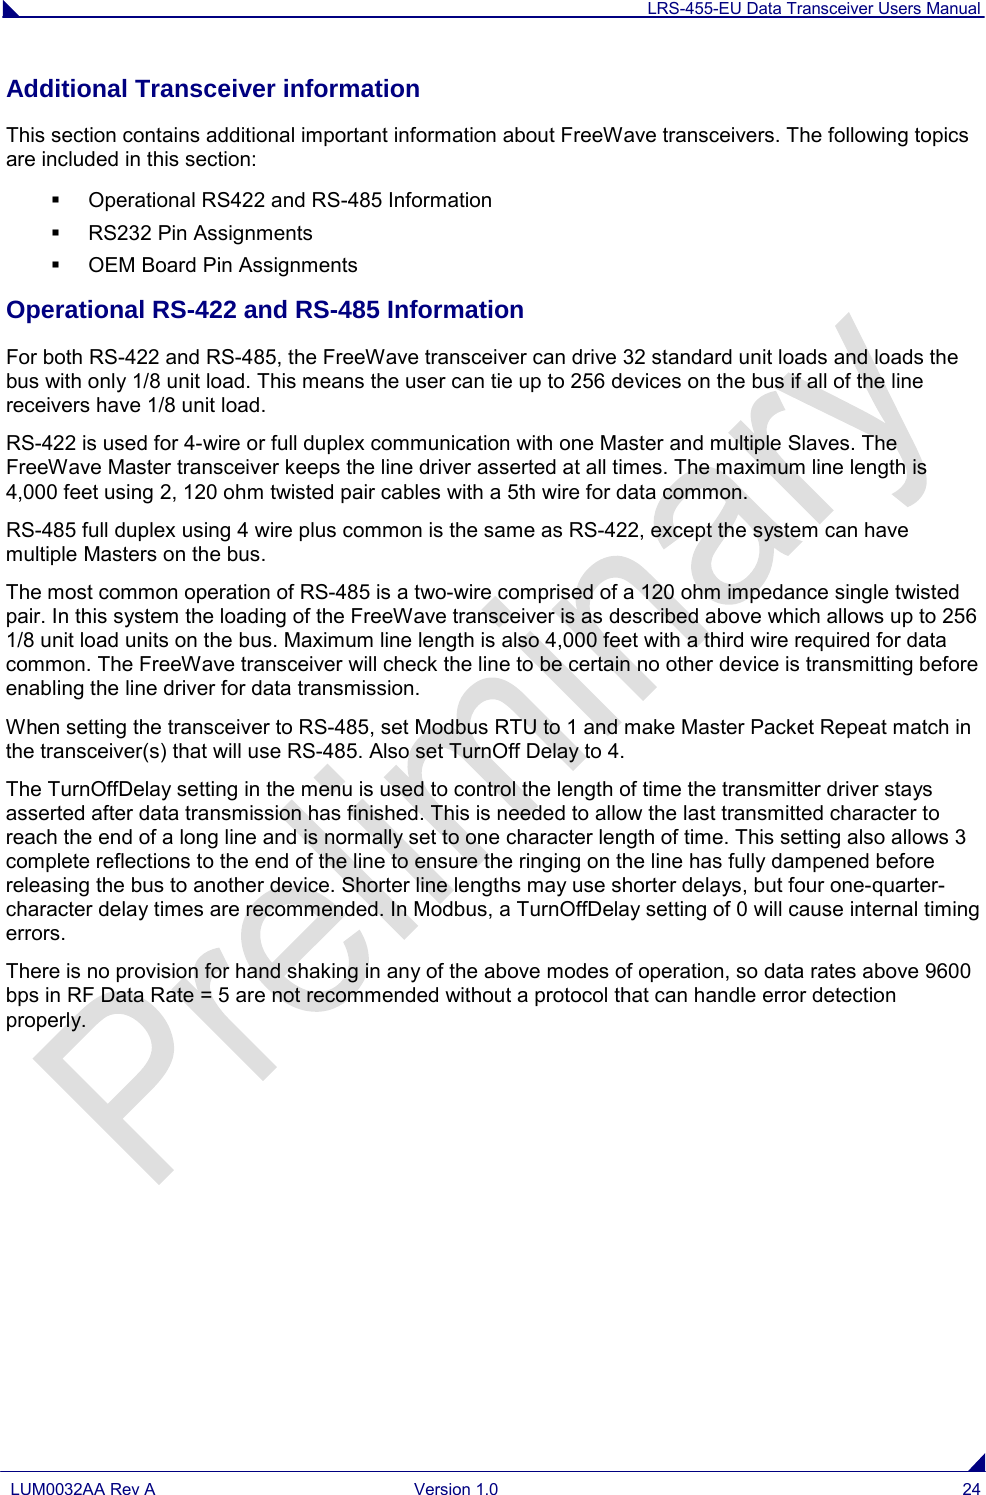 LRS-455-EU Data Transceiver Users Manual  LUM0032AA Rev A Version 1.0 24  Additional Transceiver information This section contains additional important information about FreeWave transceivers. The following topics are included in this section:  Operational RS422 and RS-485 Information  RS232 Pin Assignments  OEM Board Pin Assignments  Operational RS-422 and RS-485 Information For both RS-422 and RS-485, the FreeWave transceiver can drive 32 standard unit loads and loads the bus with only 1/8 unit load. This means the user can tie up to 256 devices on the bus if all of the line receivers have 1/8 unit load. RS-422 is used for 4-wire or full duplex communication with one Master and multiple Slaves. The FreeWave Master transceiver keeps the line driver asserted at all times. The maximum line length is 4,000 feet using 2, 120 ohm twisted pair cables with a 5th wire for data common. RS-485 full duplex using 4 wire plus common is the same as RS-422, except the system can have multiple Masters on the bus. The most common operation of RS-485 is a two-wire comprised of a 120 ohm impedance single twisted pair. In this system the loading of the FreeWave transceiver is as described above which allows up to 256 1/8 unit load units on the bus. Maximum line length is also 4,000 feet with a third wire required for data common. The FreeWave transceiver will check the line to be certain no other device is transmitting before enabling the line driver for data transmission. When setting the transceiver to RS-485, set Modbus RTU to 1 and make Master Packet Repeat match in the transceiver(s) that will use RS-485. Also set TurnOff Delay to 4. The TurnOffDelay setting in the menu is used to control the length of time the transmitter driver stays asserted after data transmission has finished. This is needed to allow the last transmitted character to reach the end of a long line and is normally set to one character length of time. This setting also allows 3 complete reflections to the end of the line to ensure the ringing on the line has fully dampened before releasing the bus to another device. Shorter line lengths may use shorter delays, but four one-quarter-character delay times are recommended. In Modbus, a TurnOffDelay setting of 0 will cause internal timing errors. There is no provision for hand shaking in any of the above modes of operation, so data rates above 9600 bps in RF Data Rate = 5 are not recommended without a protocol that can handle error detection properly. 